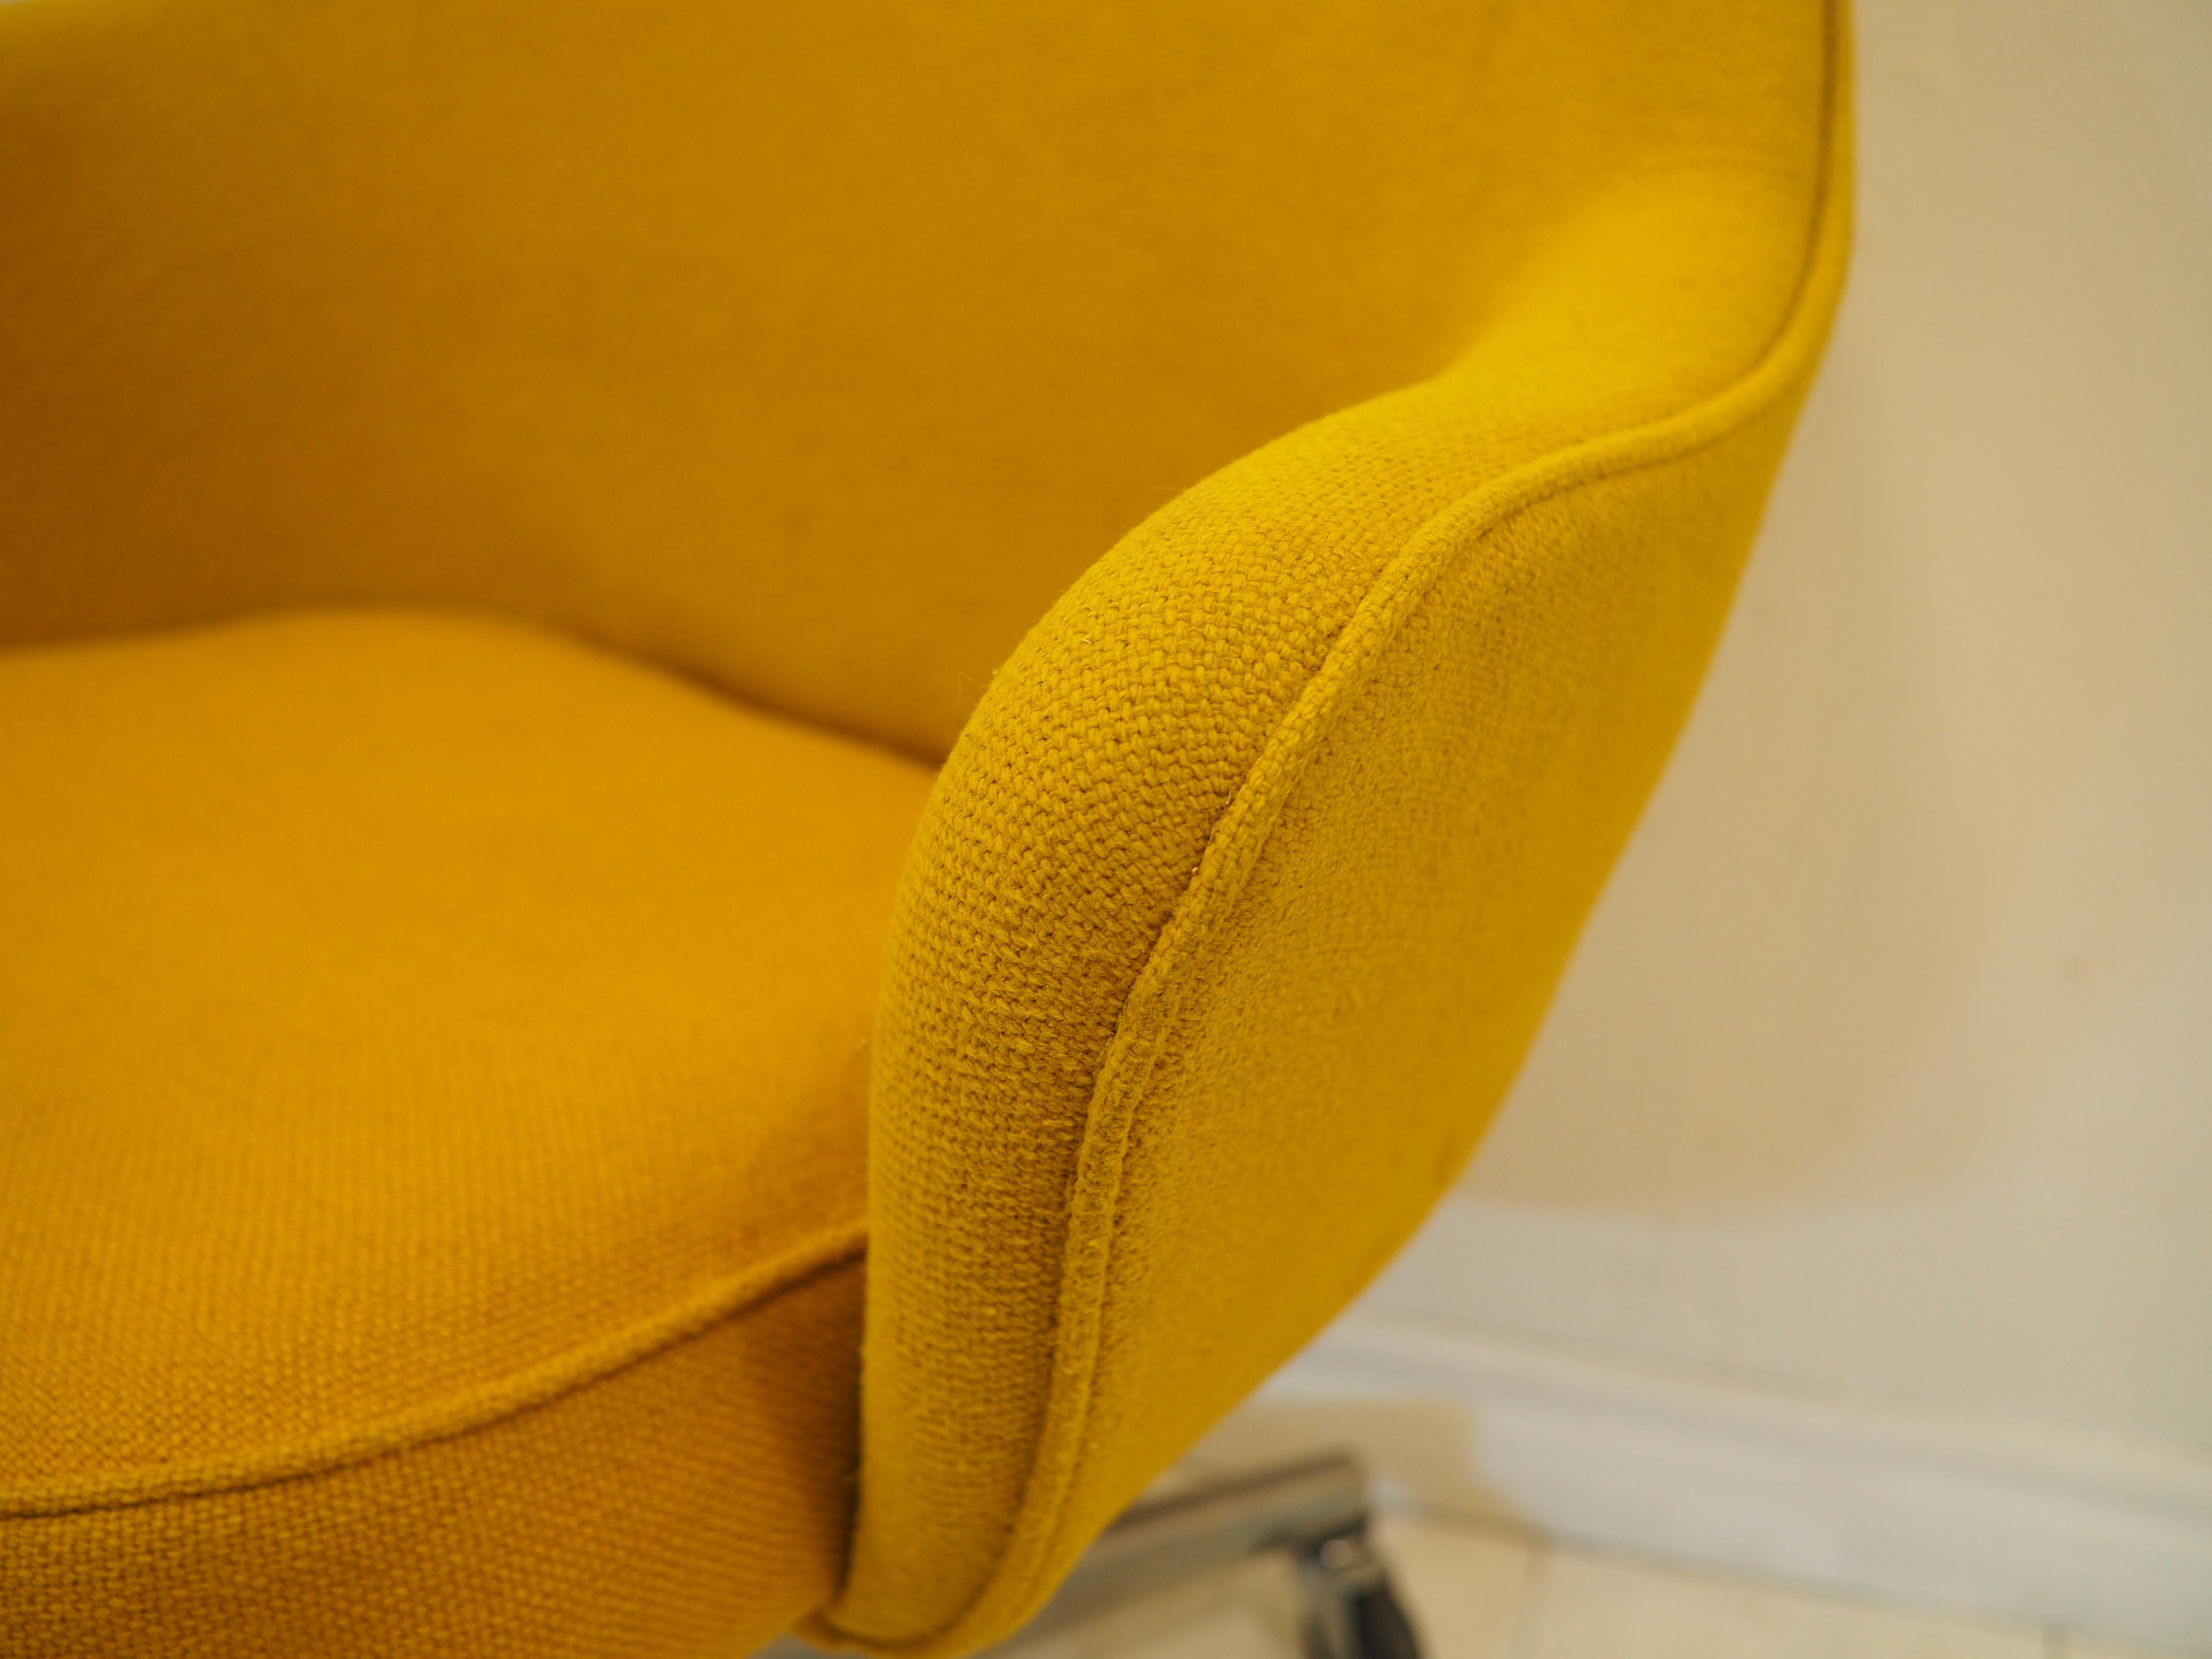 1972 Knoll swivel armchair, designed by Eero Saarinen.

Original mustard coloured fabric shows minor signs of wear and discoloration but is overall in good vintage condition.

Chair will likely have to be reupholstered and/or have structural foam